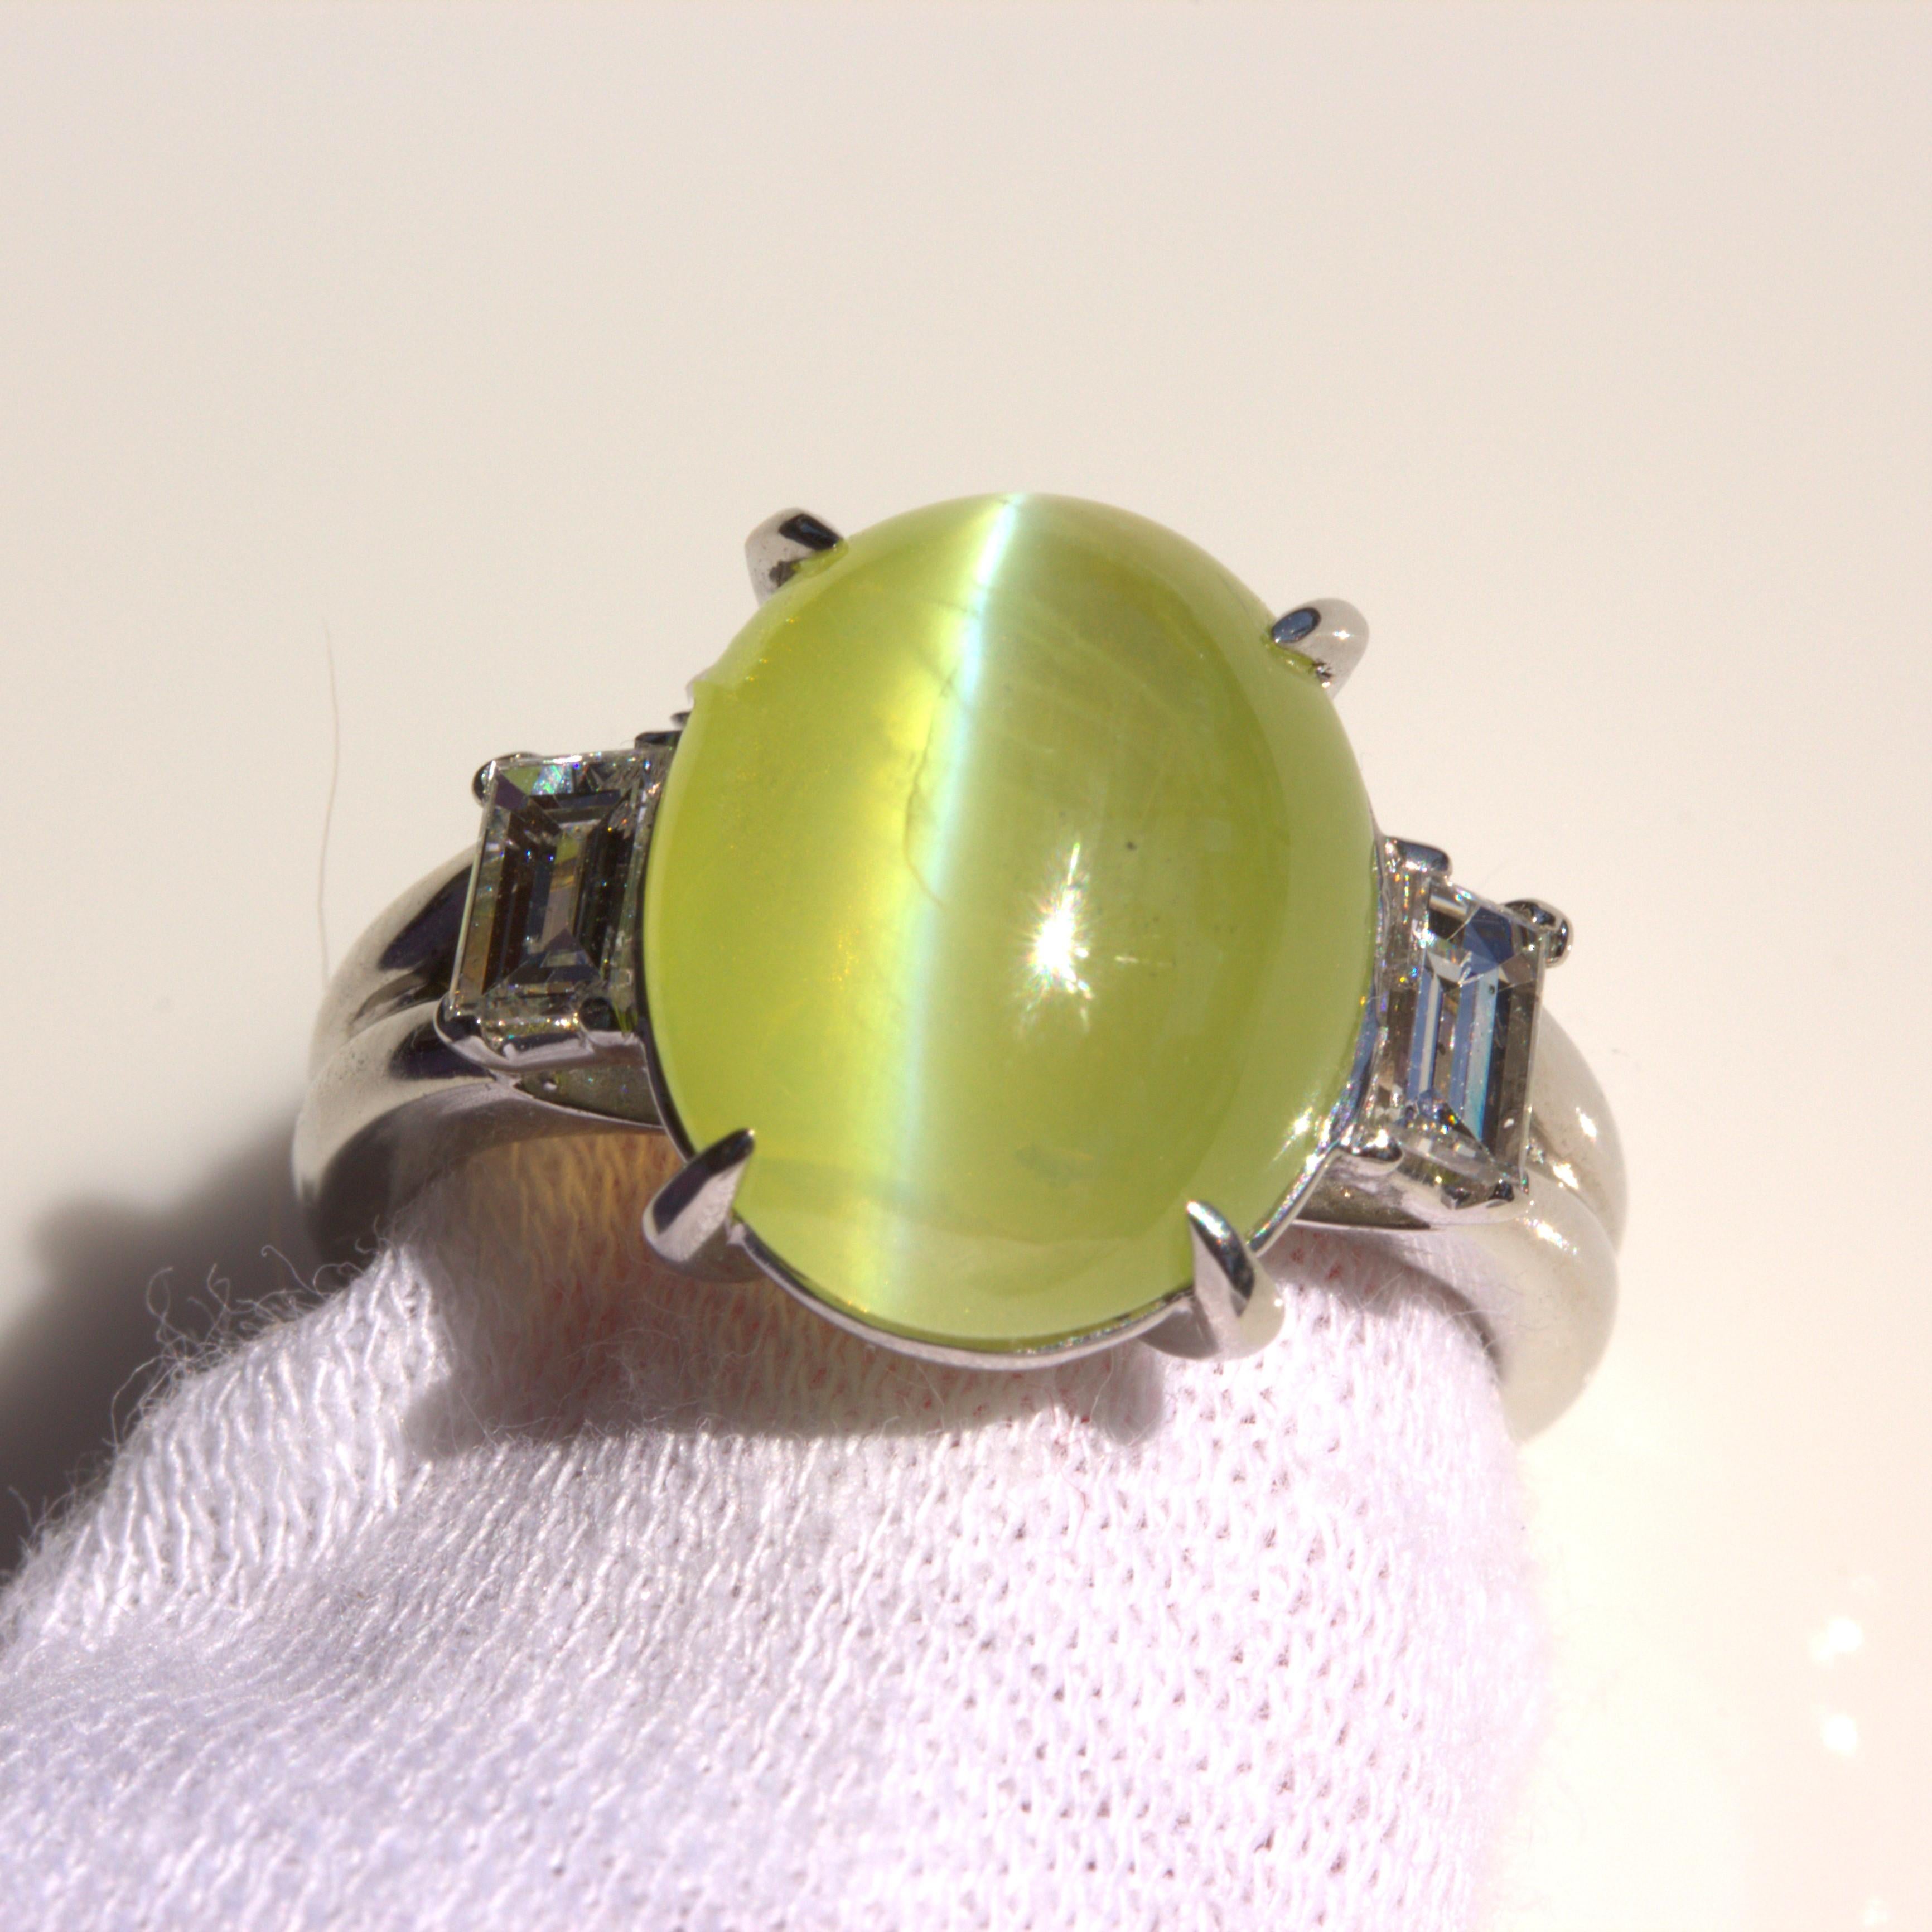 A classy and elegant platinum ring featuring a 8.27 carat cats eye chrysoberyl. Not only does the gem have a large size but it has very fine quality in its bright and open yellow-green color and its strong chatoyancy (cats eye effect). It is